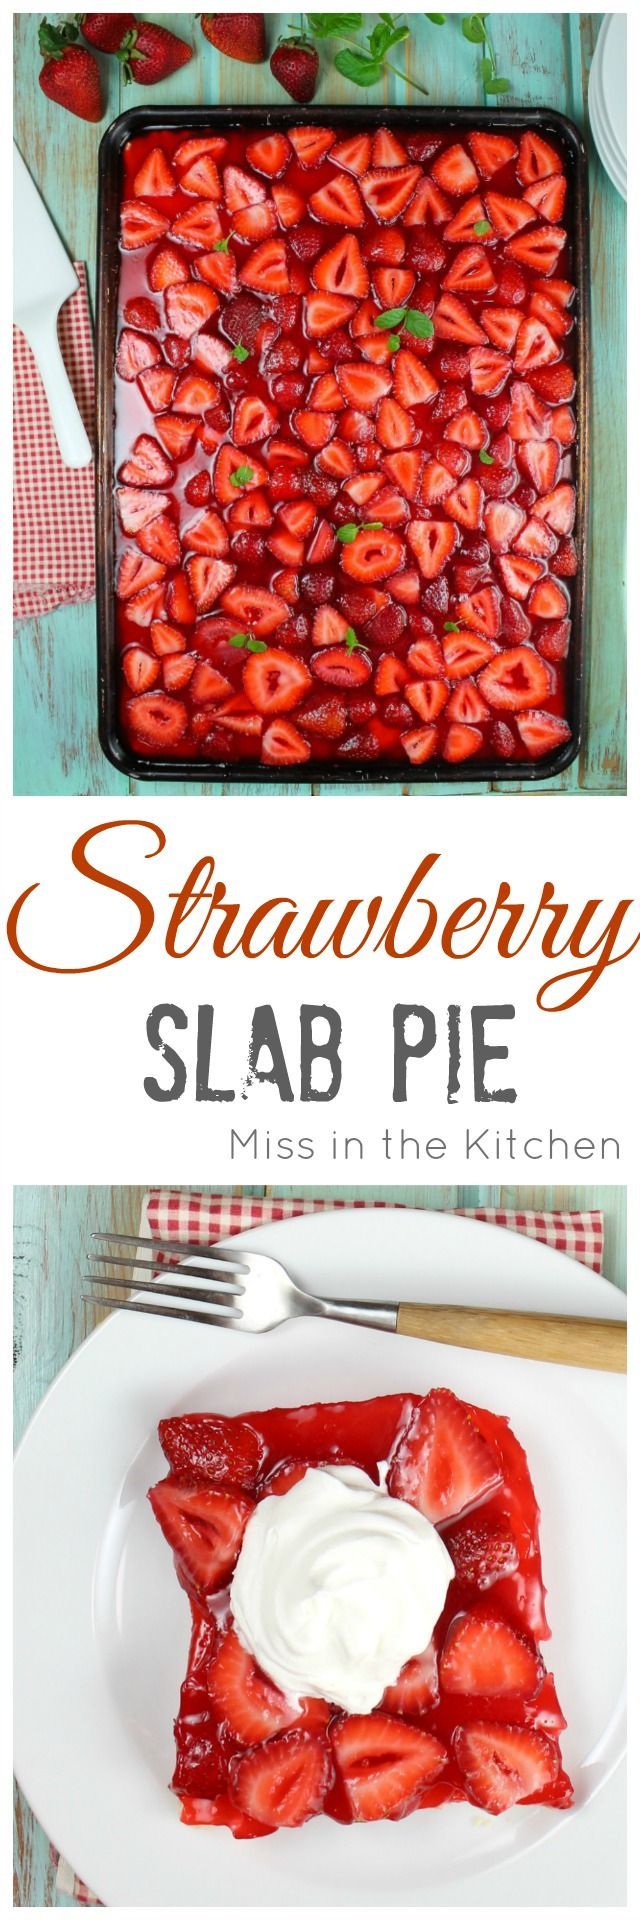 Strawberry Slab Pie Recipe for all of your summer get togethers and cookouts.  Made with fresh strawberrie